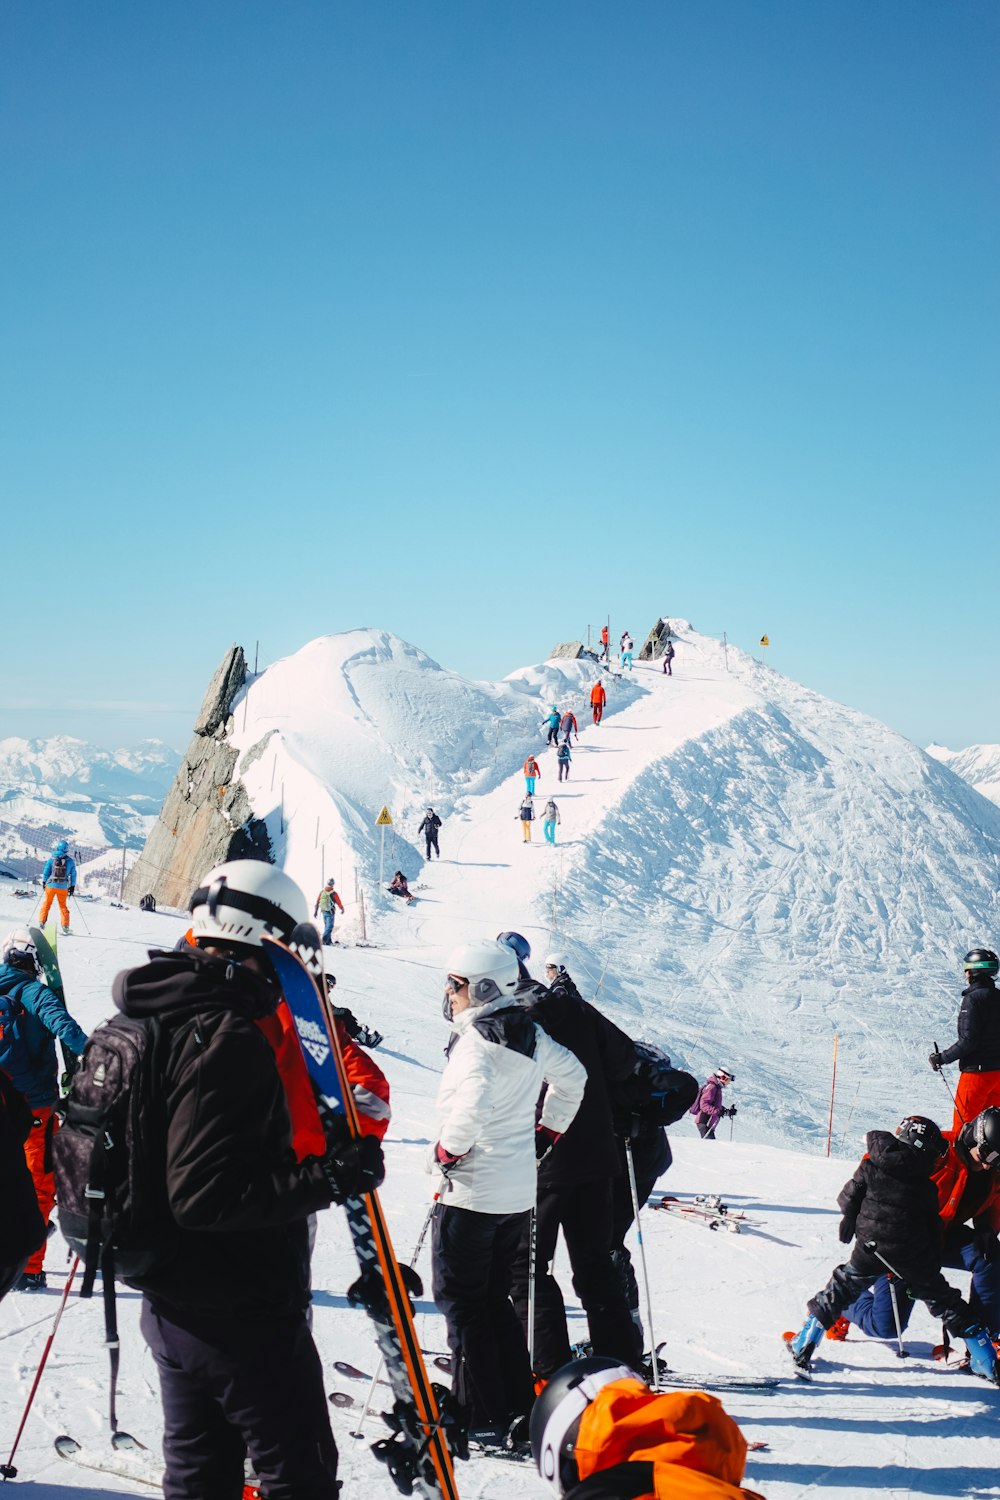 a group of skiers gather on a snowy mountain